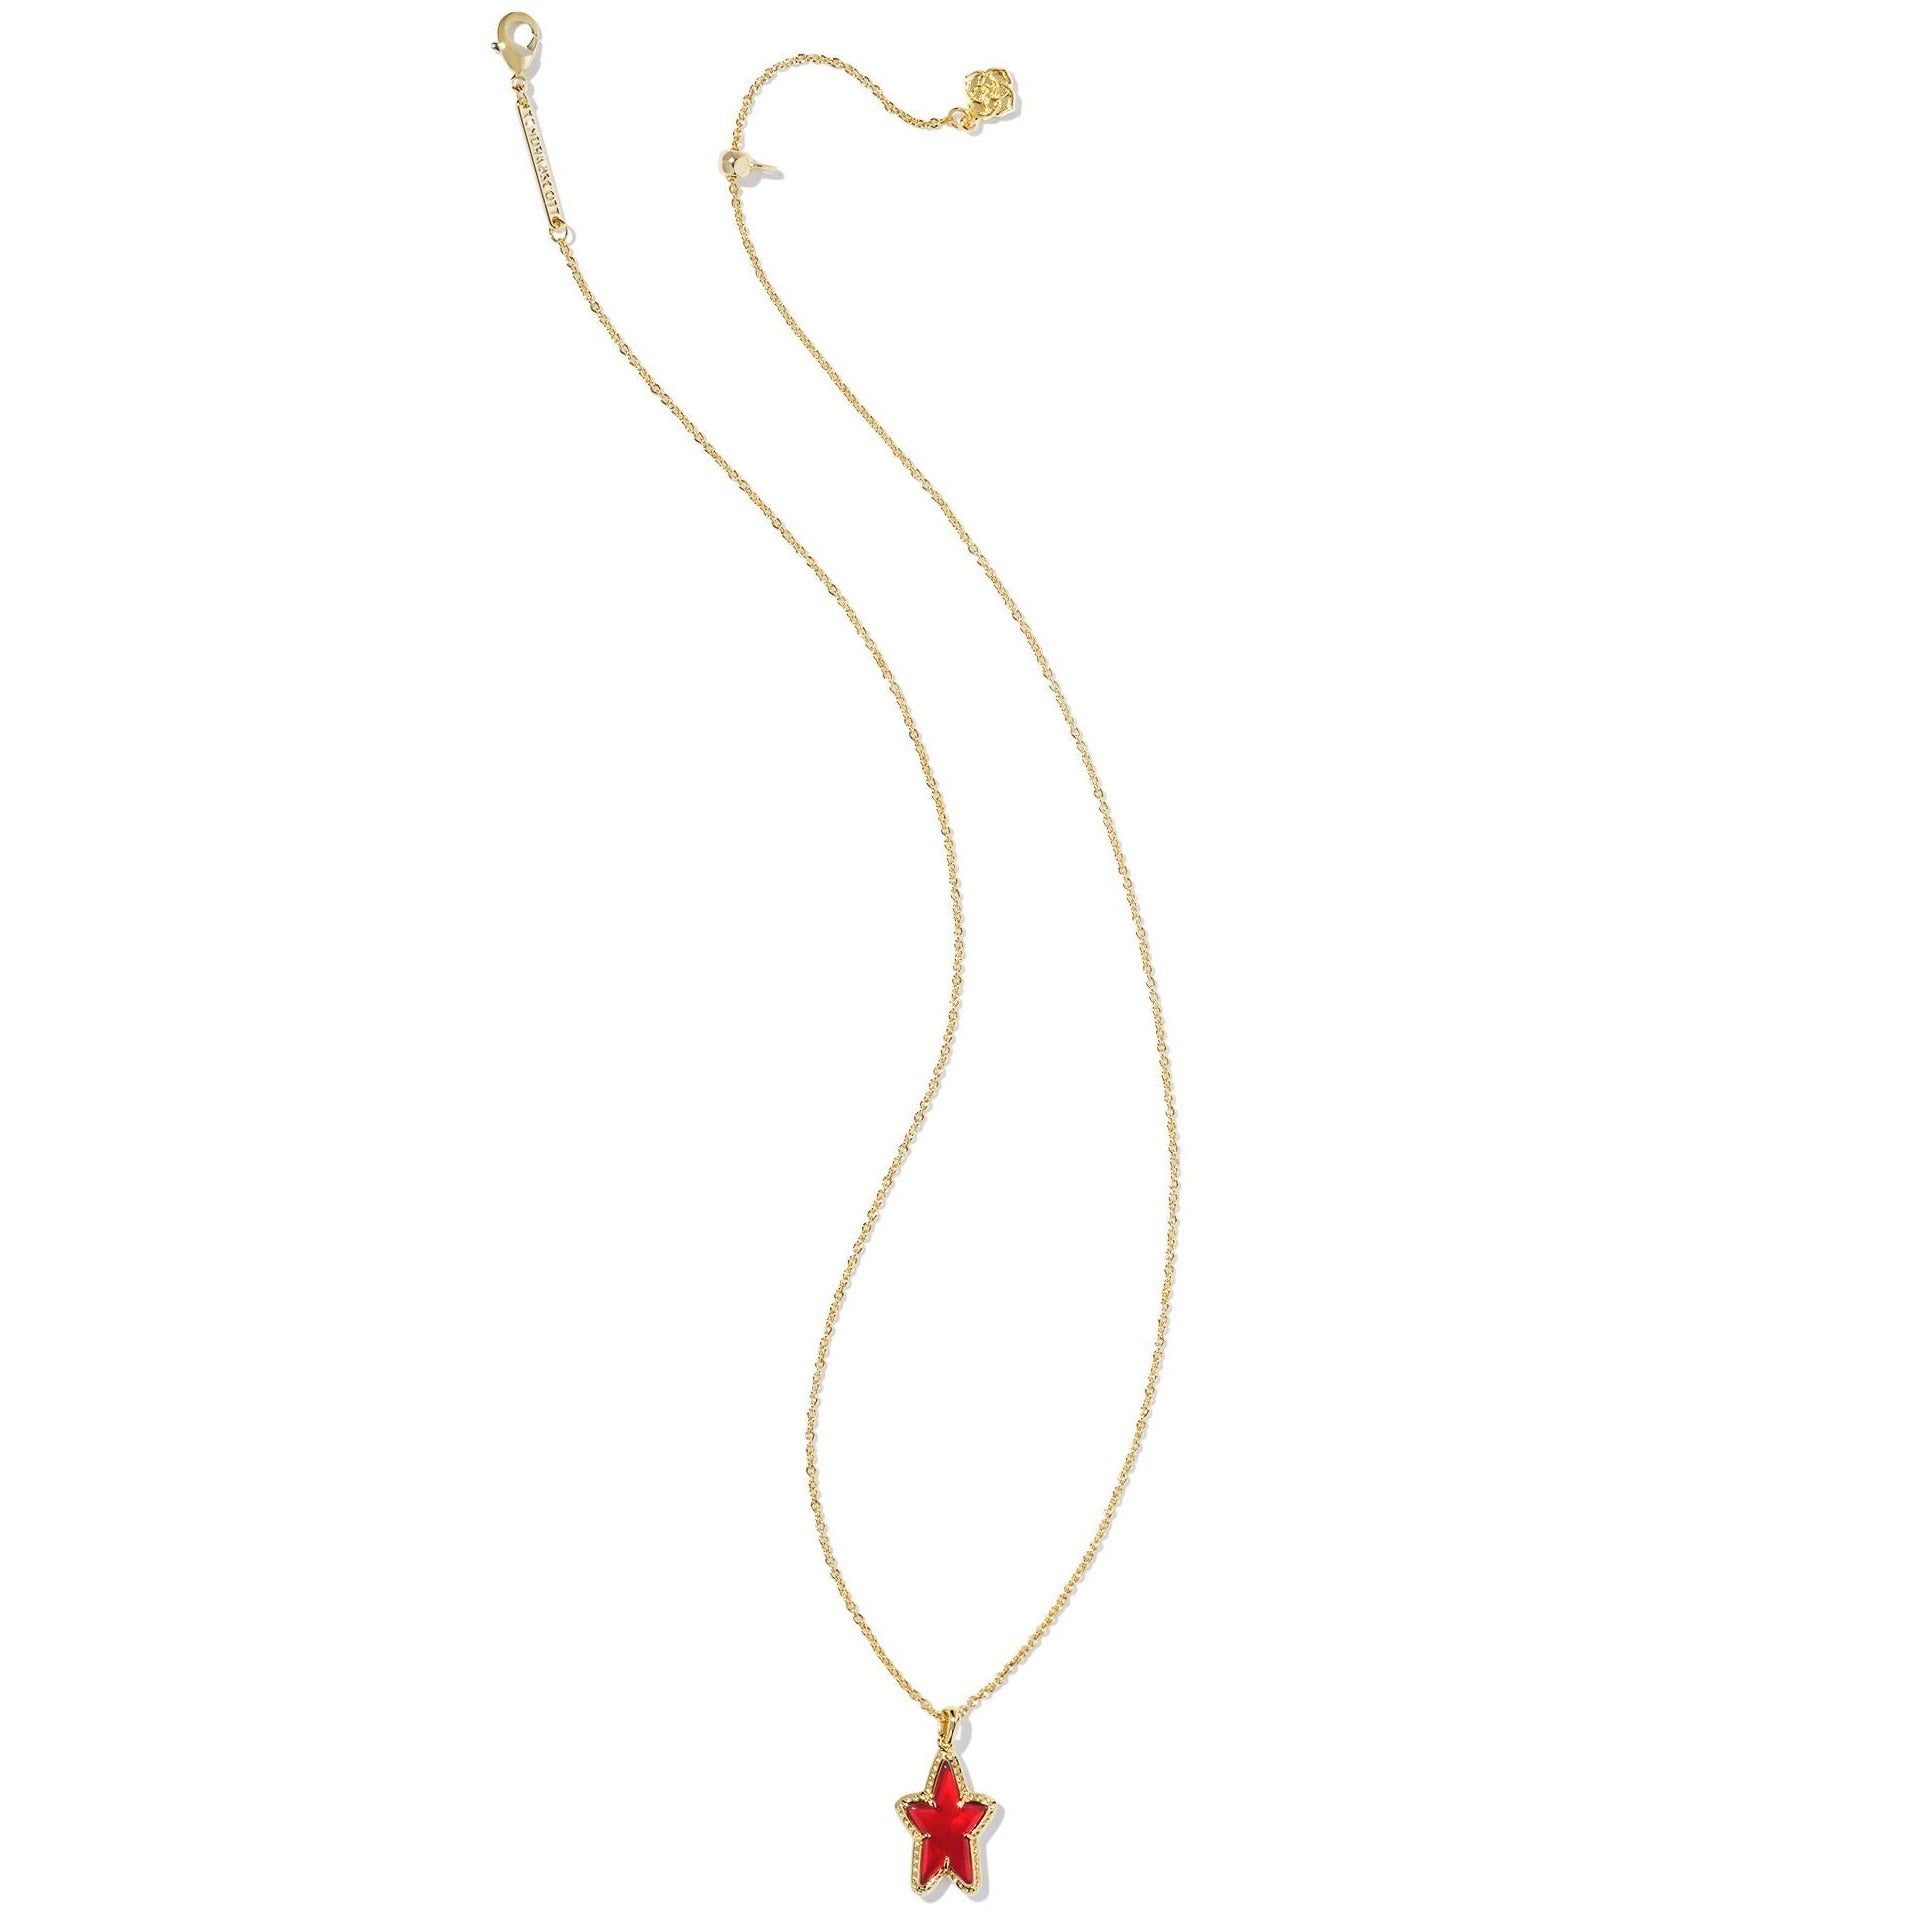 Kendra Scott | Ada Gold Star Short Pendant Necklace in Red Illusion - Giddy Up Glamour Boutique